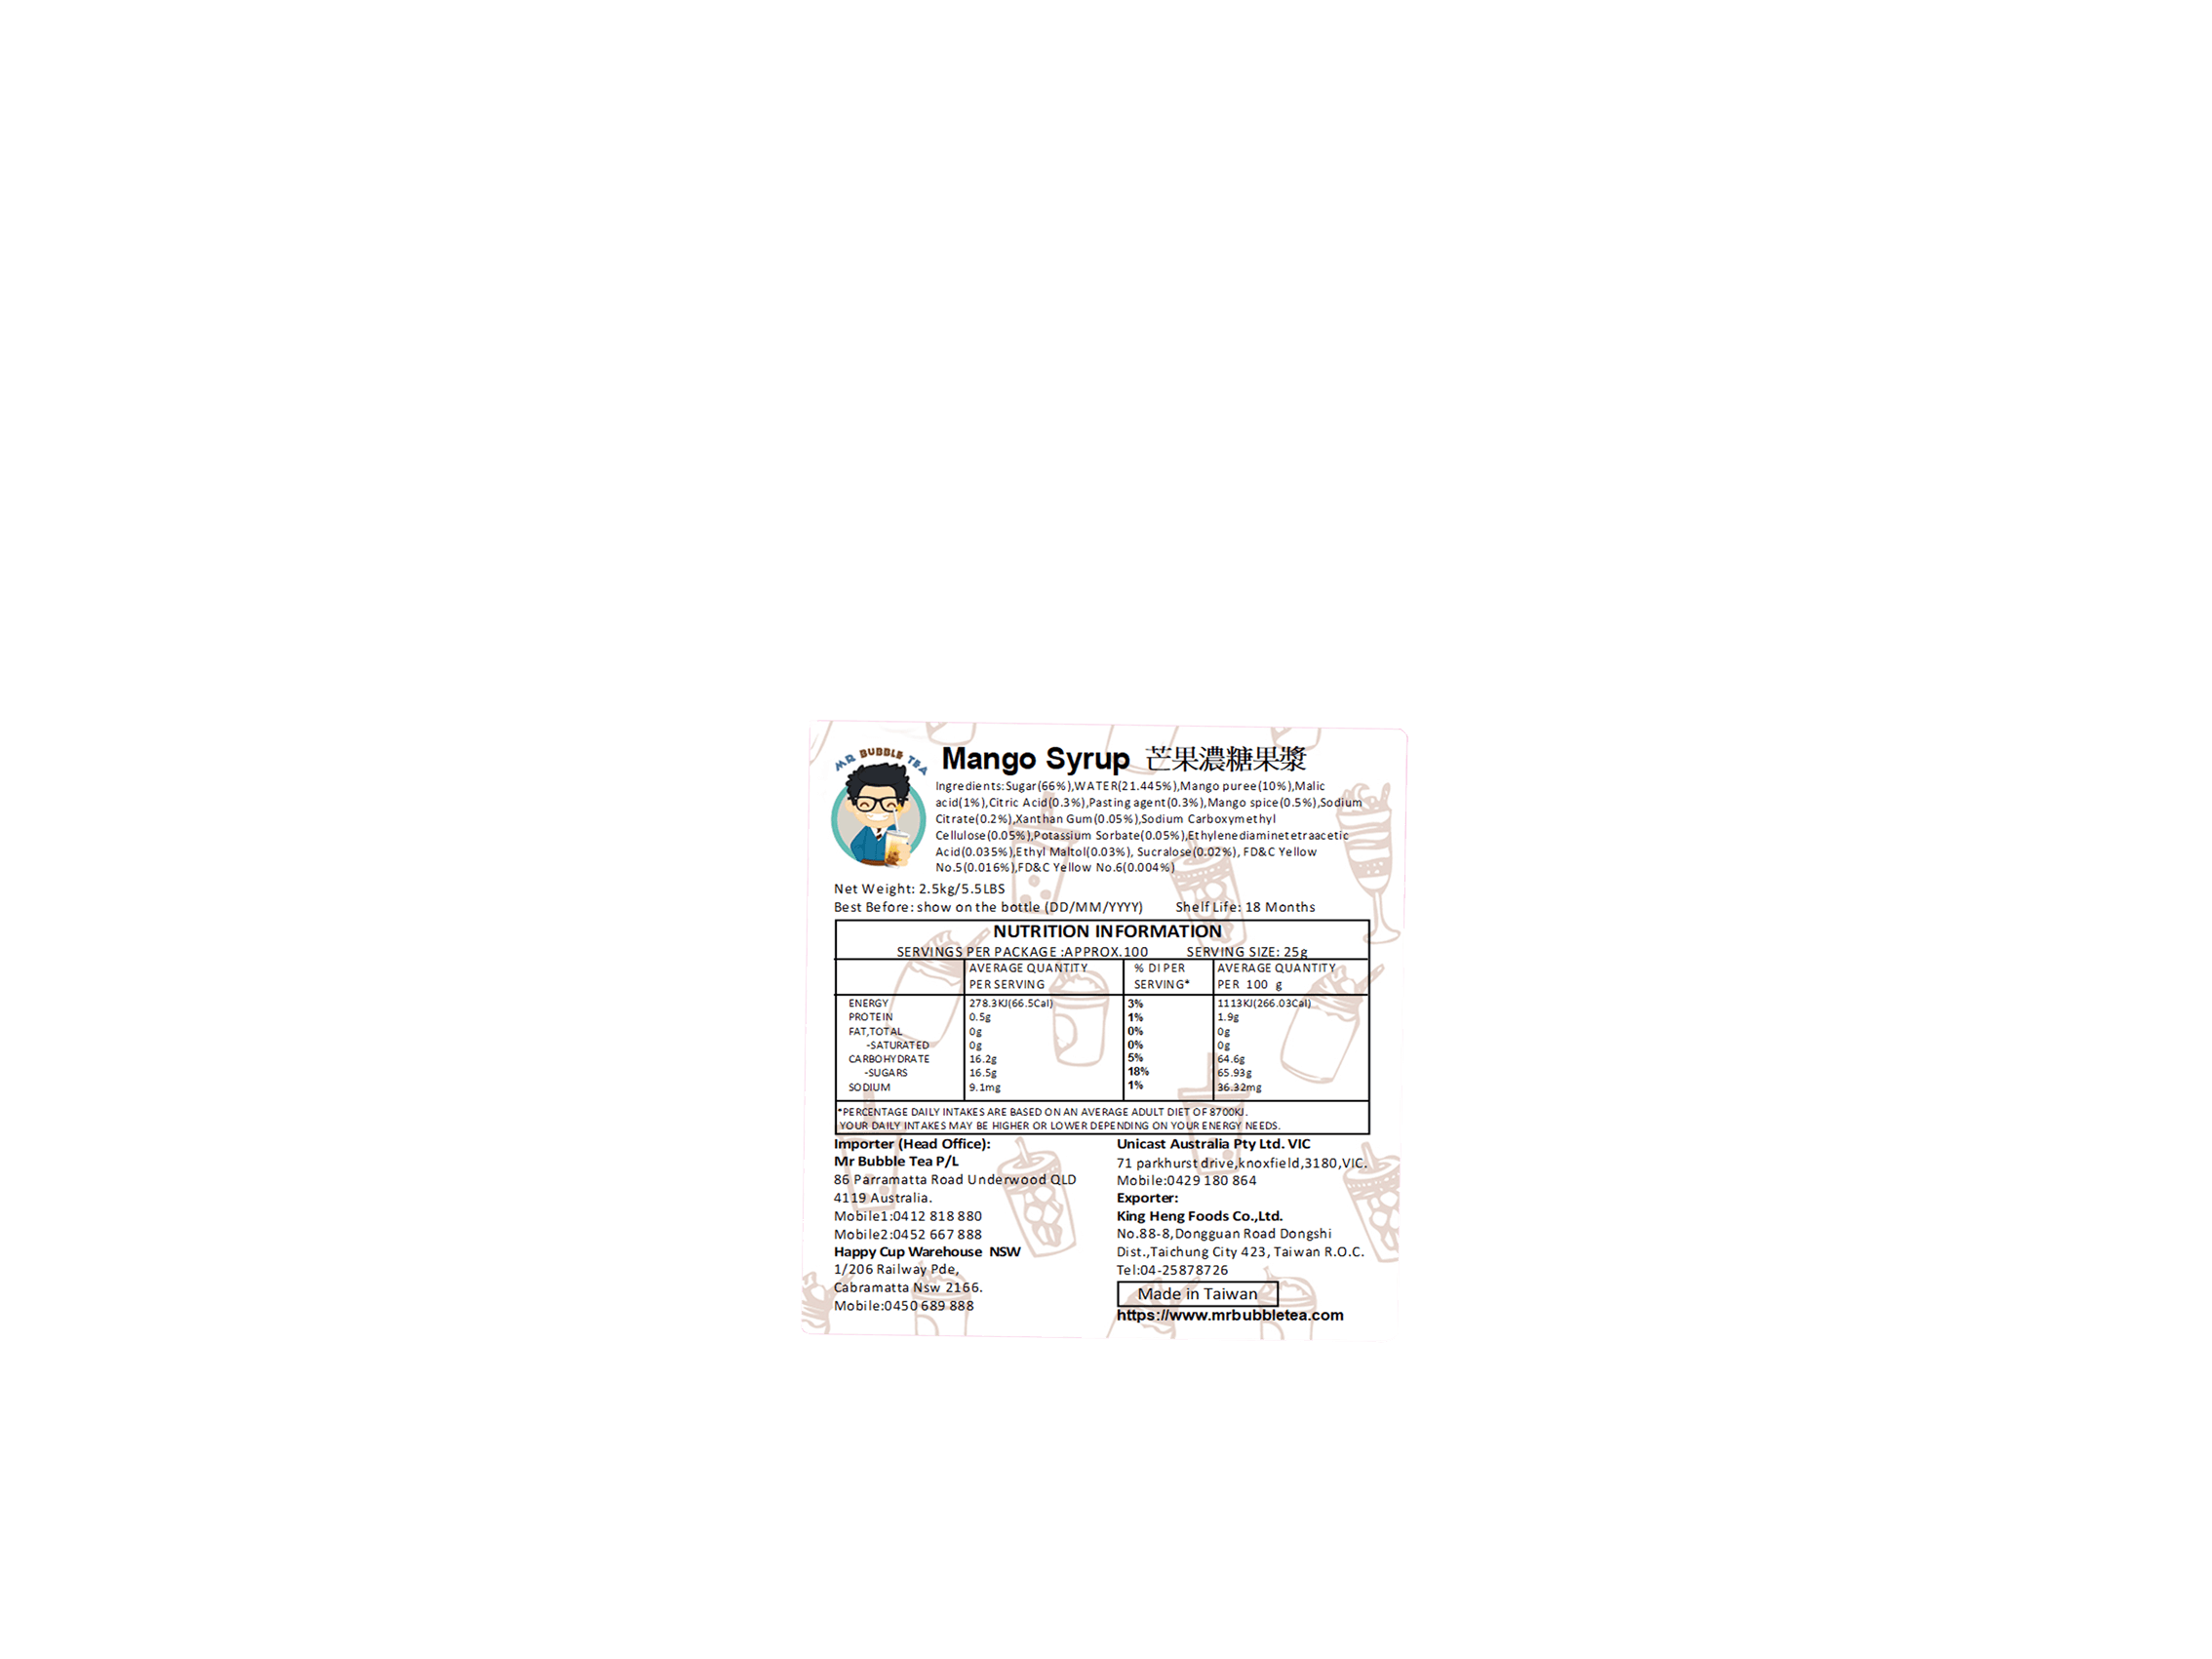 Bubble Tea Mango Syrup Label with the Ingredients and Nutrition Facts